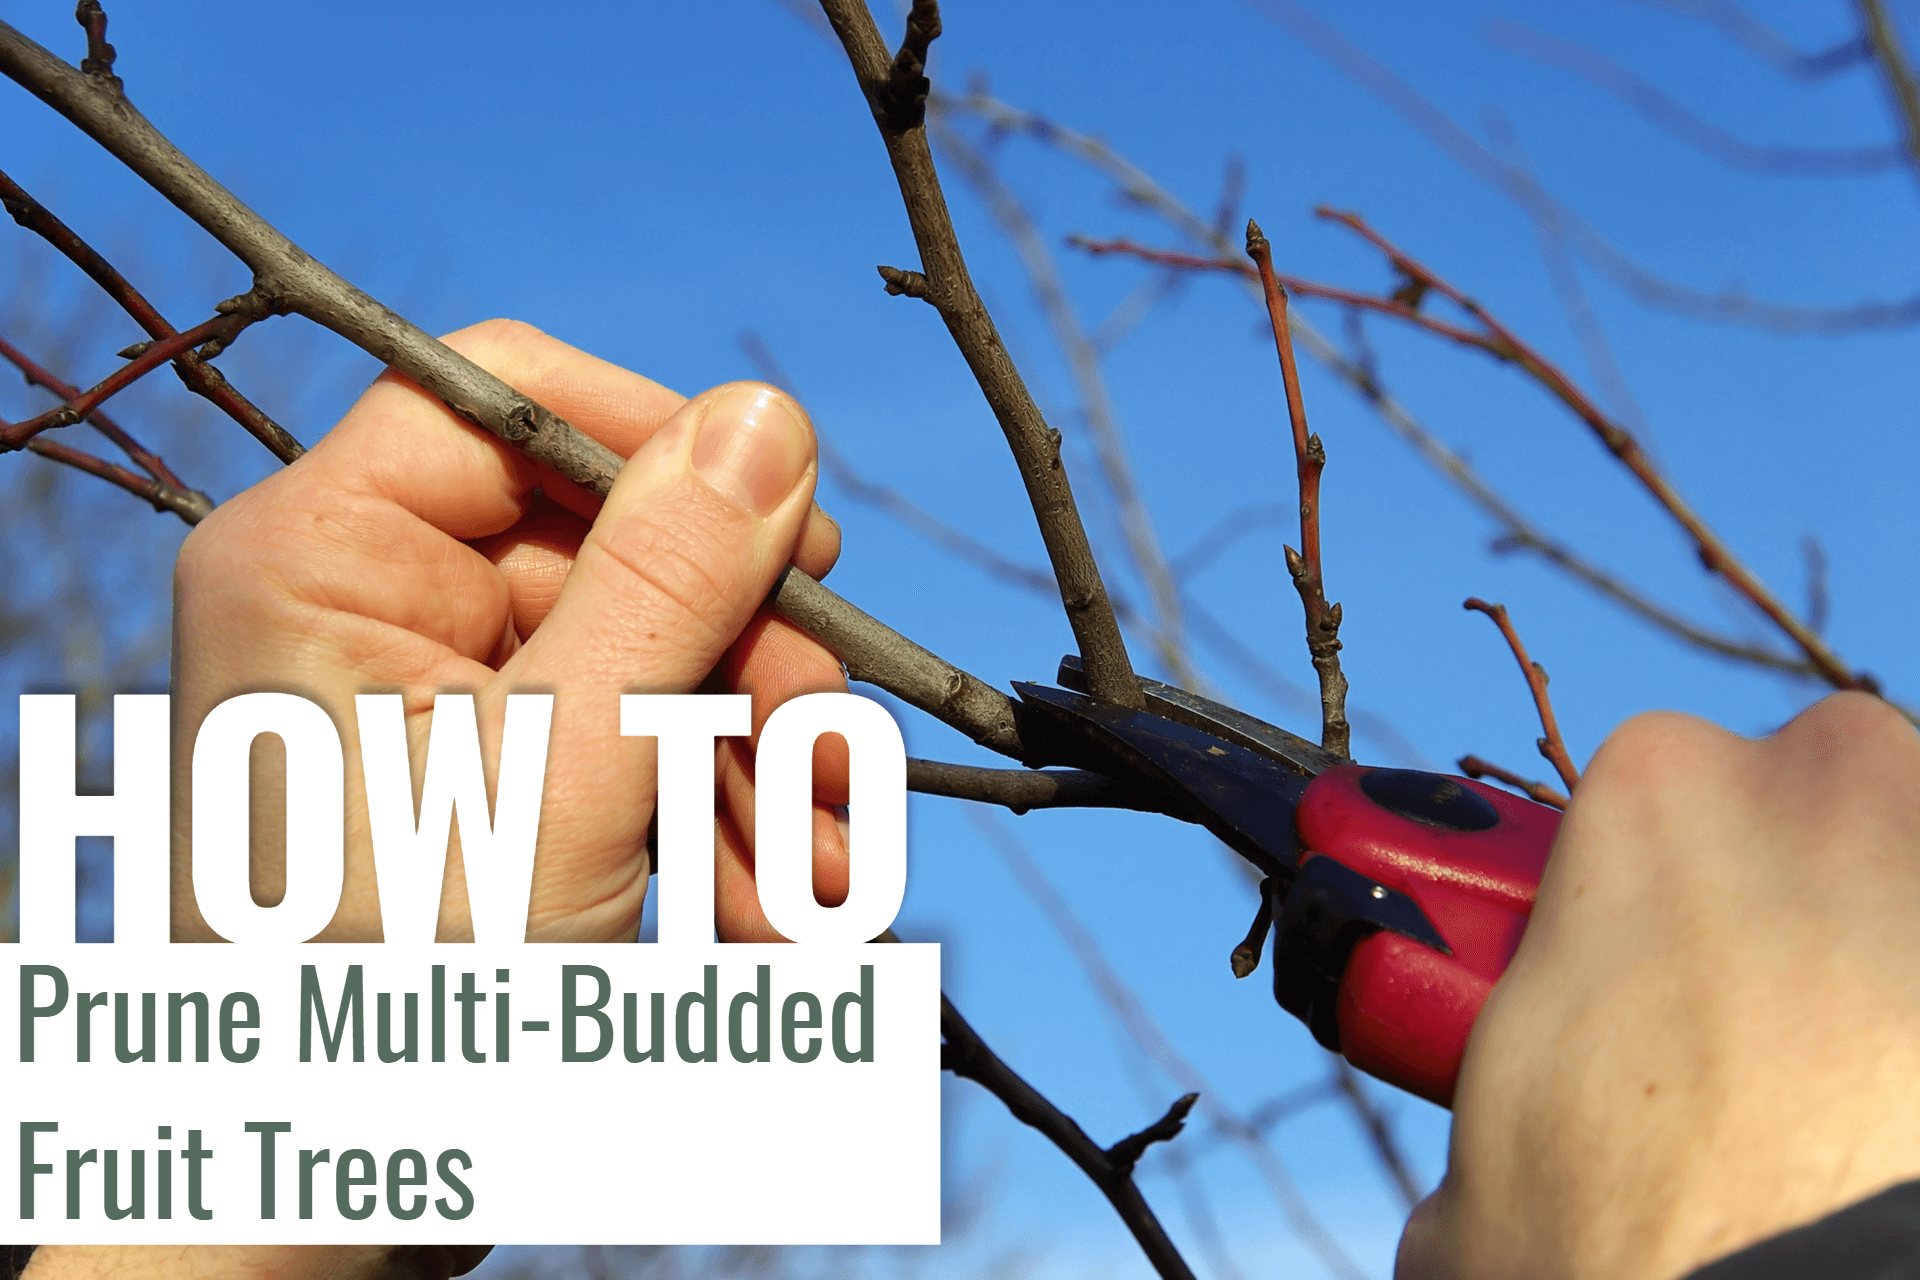 How to Prune Multi-budded Fruit Trees!